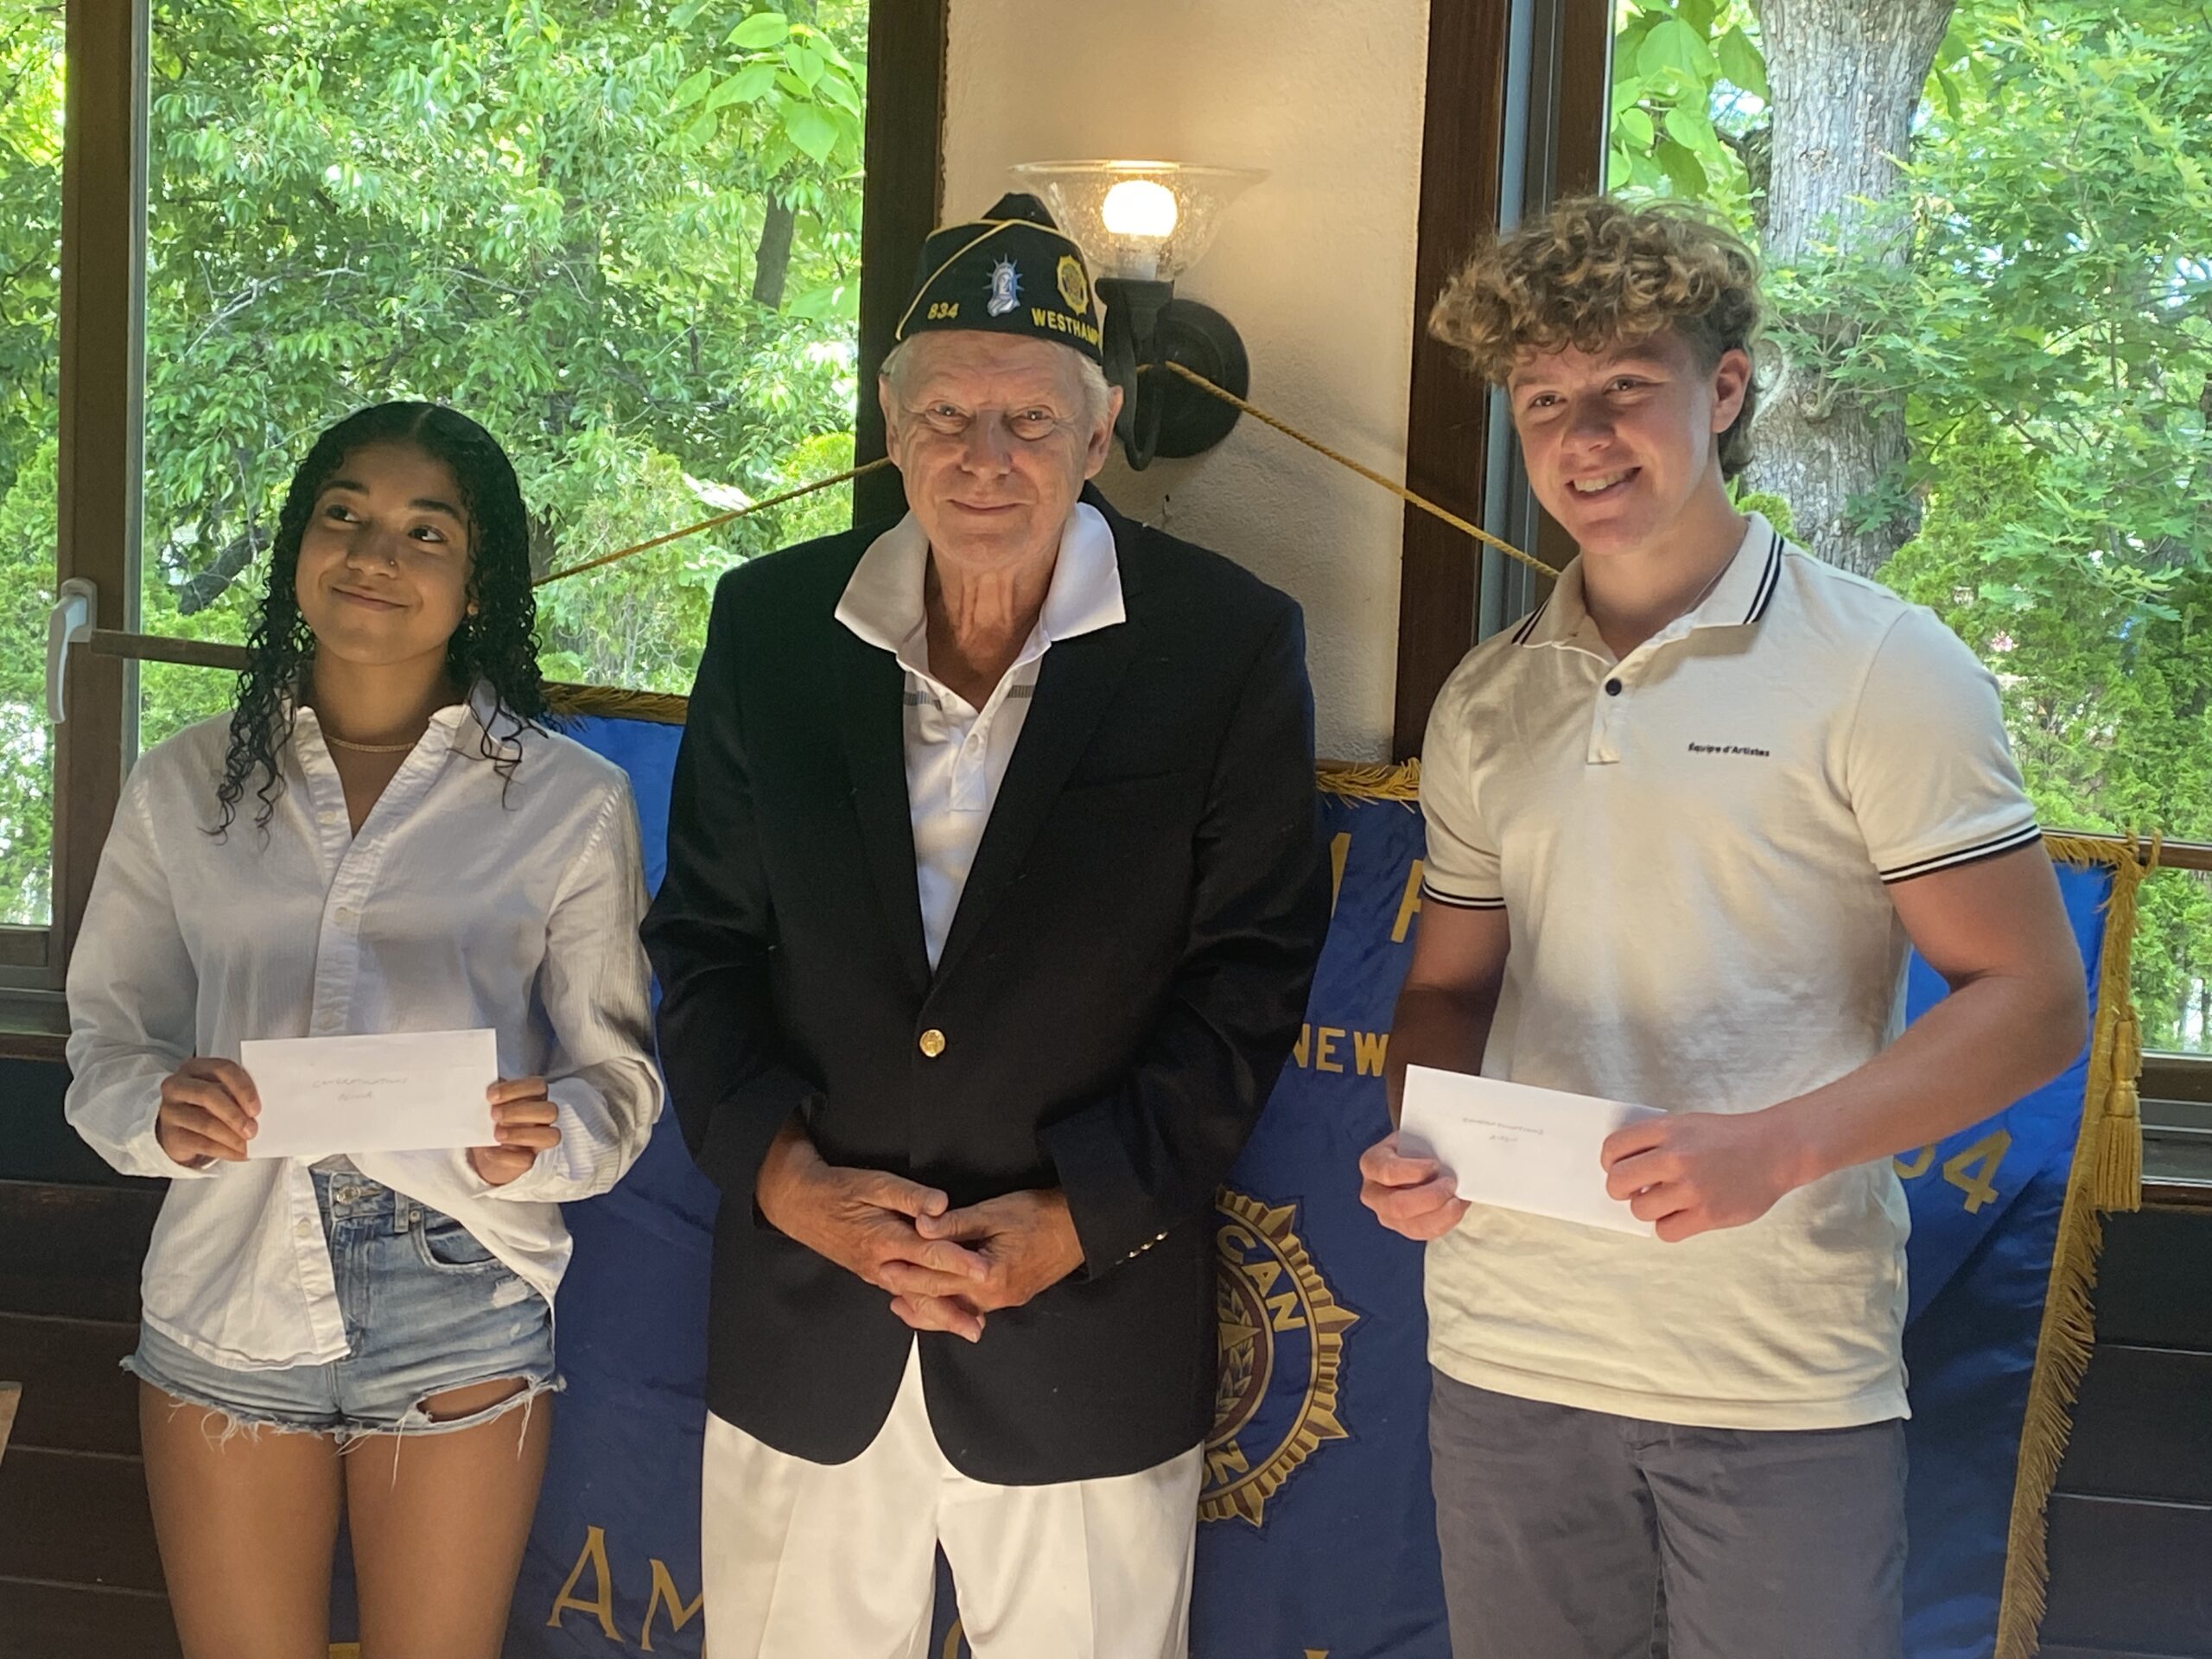 Olivia Reid, left, and Aiden Berdinka were presented with scholarship checks from Tom Hadlock, commander of the American Legion Post 834 Westhampton, at a meeting on  June 18.